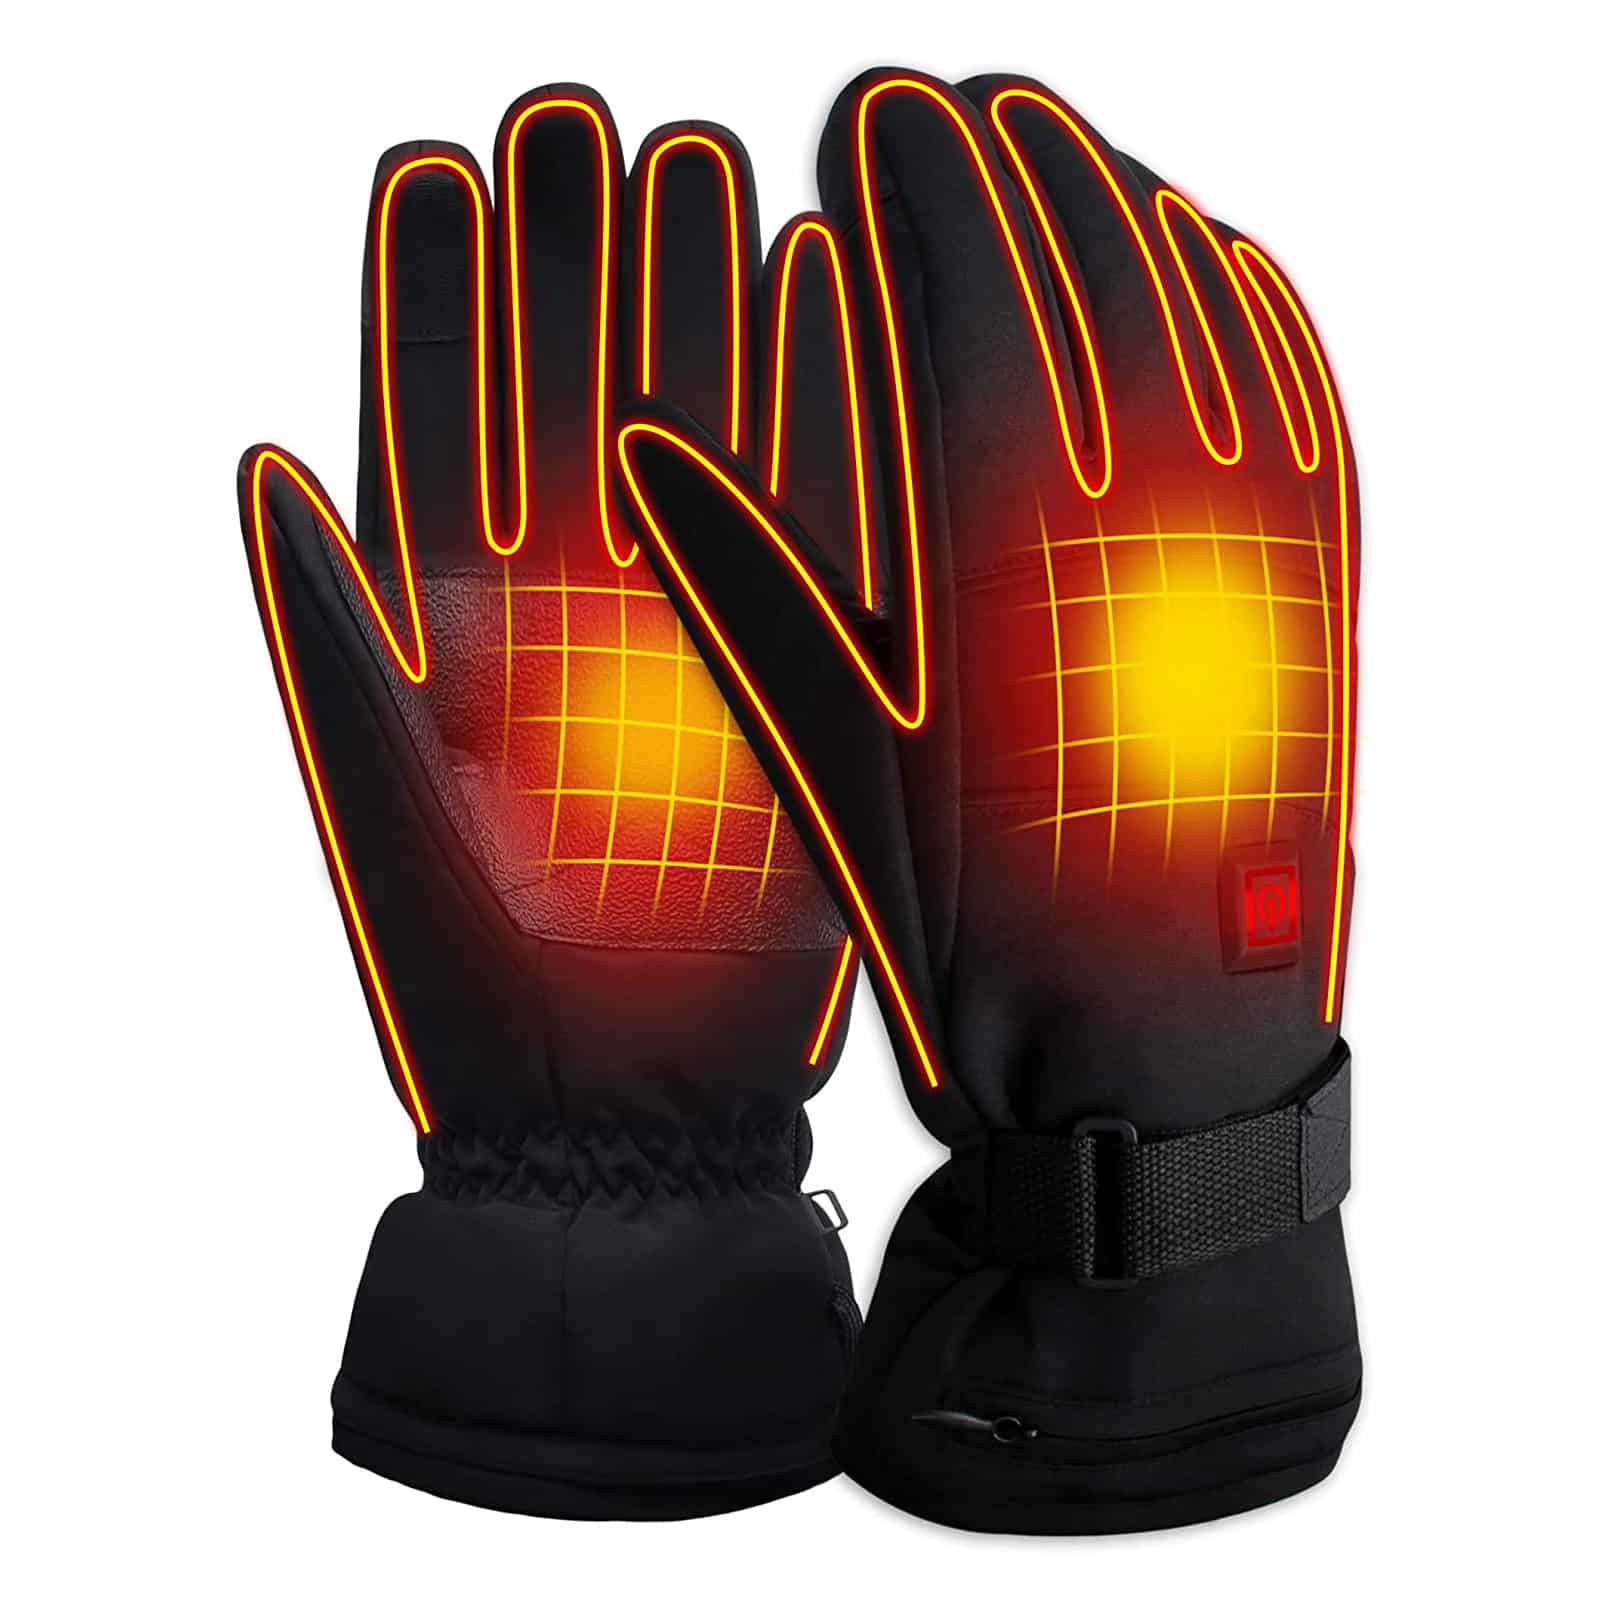 Top 10 Best Electric Heated Gloves in 2023 Reviews Buyer's Guide